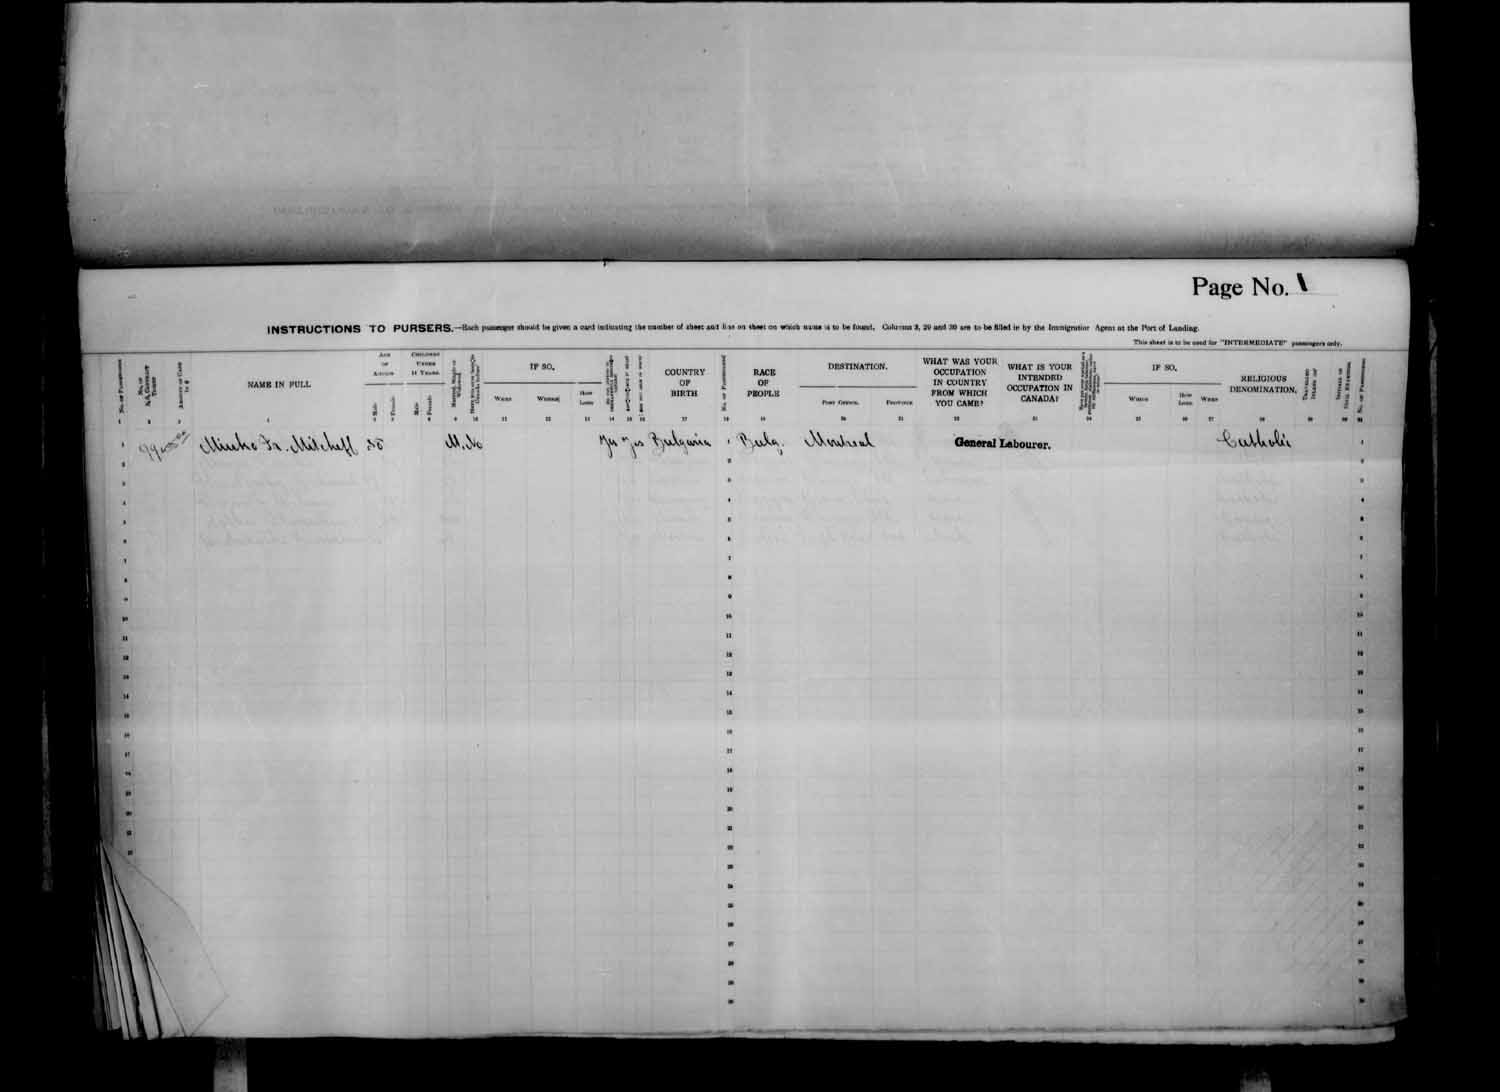 Digitized page of Passenger Lists for Image No.: e003686907